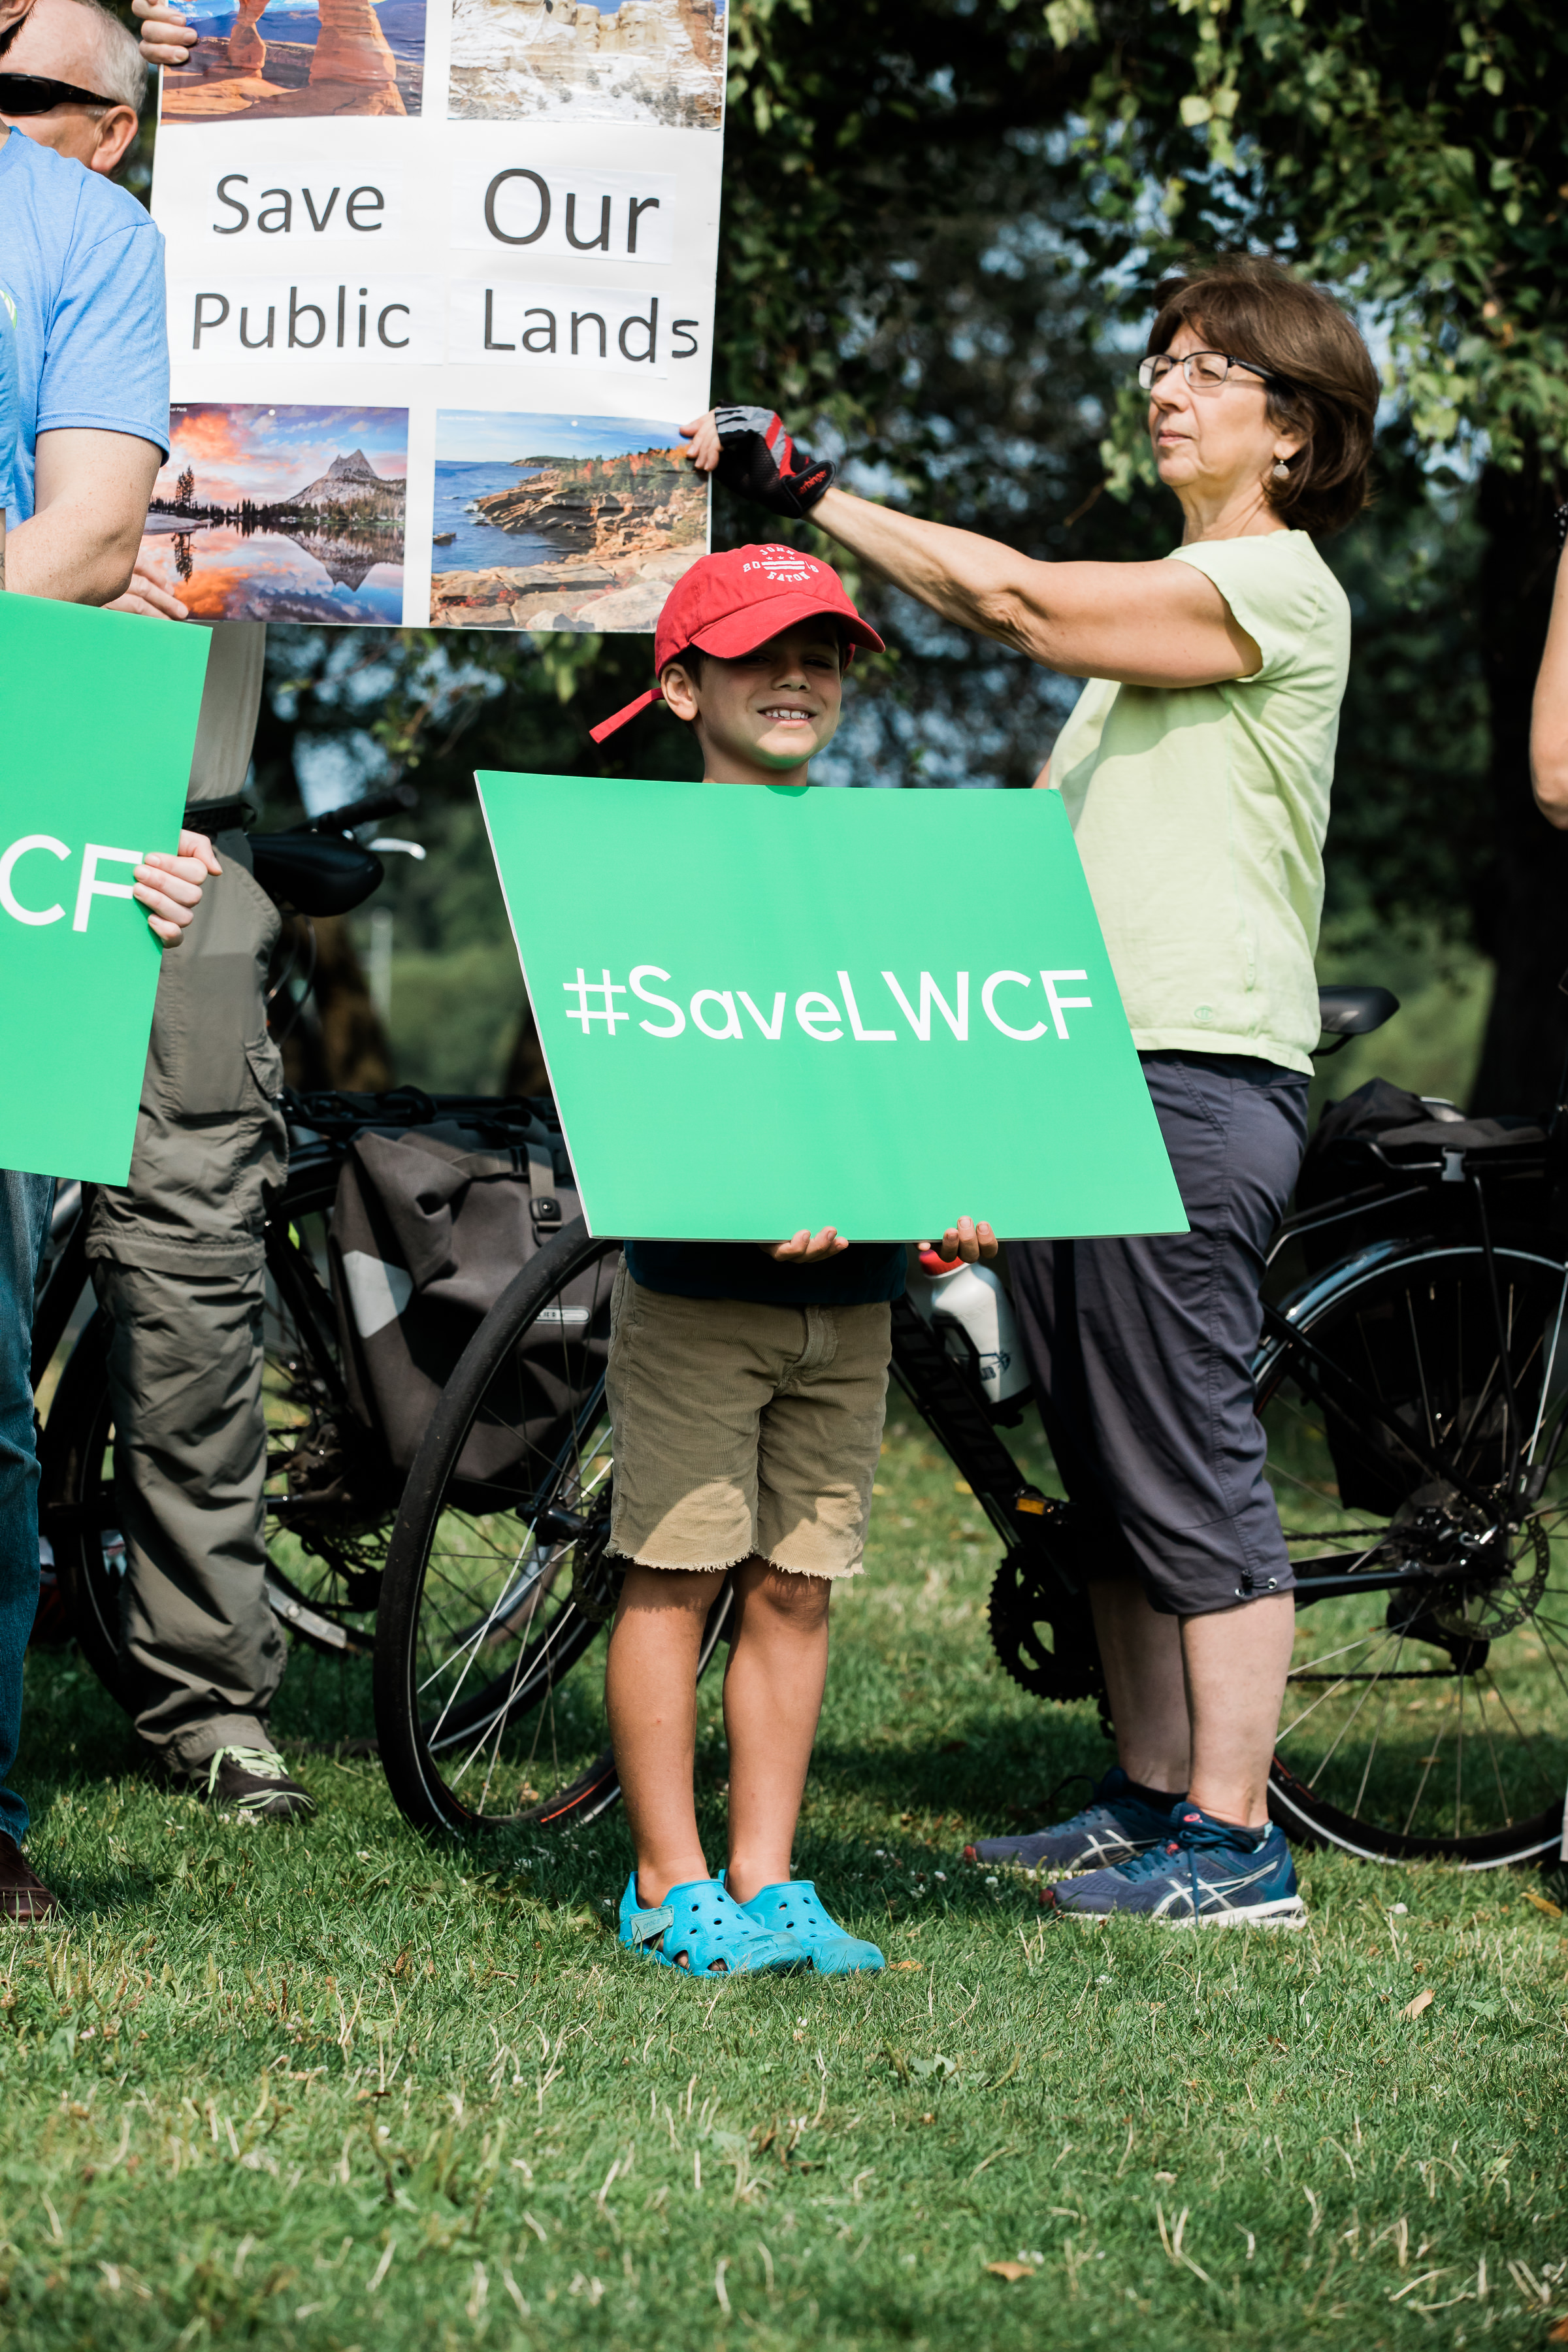  The Land &amp; Water Conservation Fund preserves what’s best about our outdoors for future generations to enjoy. As Cascade Designs CFO Steve McClure said, “Let’s pay it forward.” Photo by Stevie Rotella 